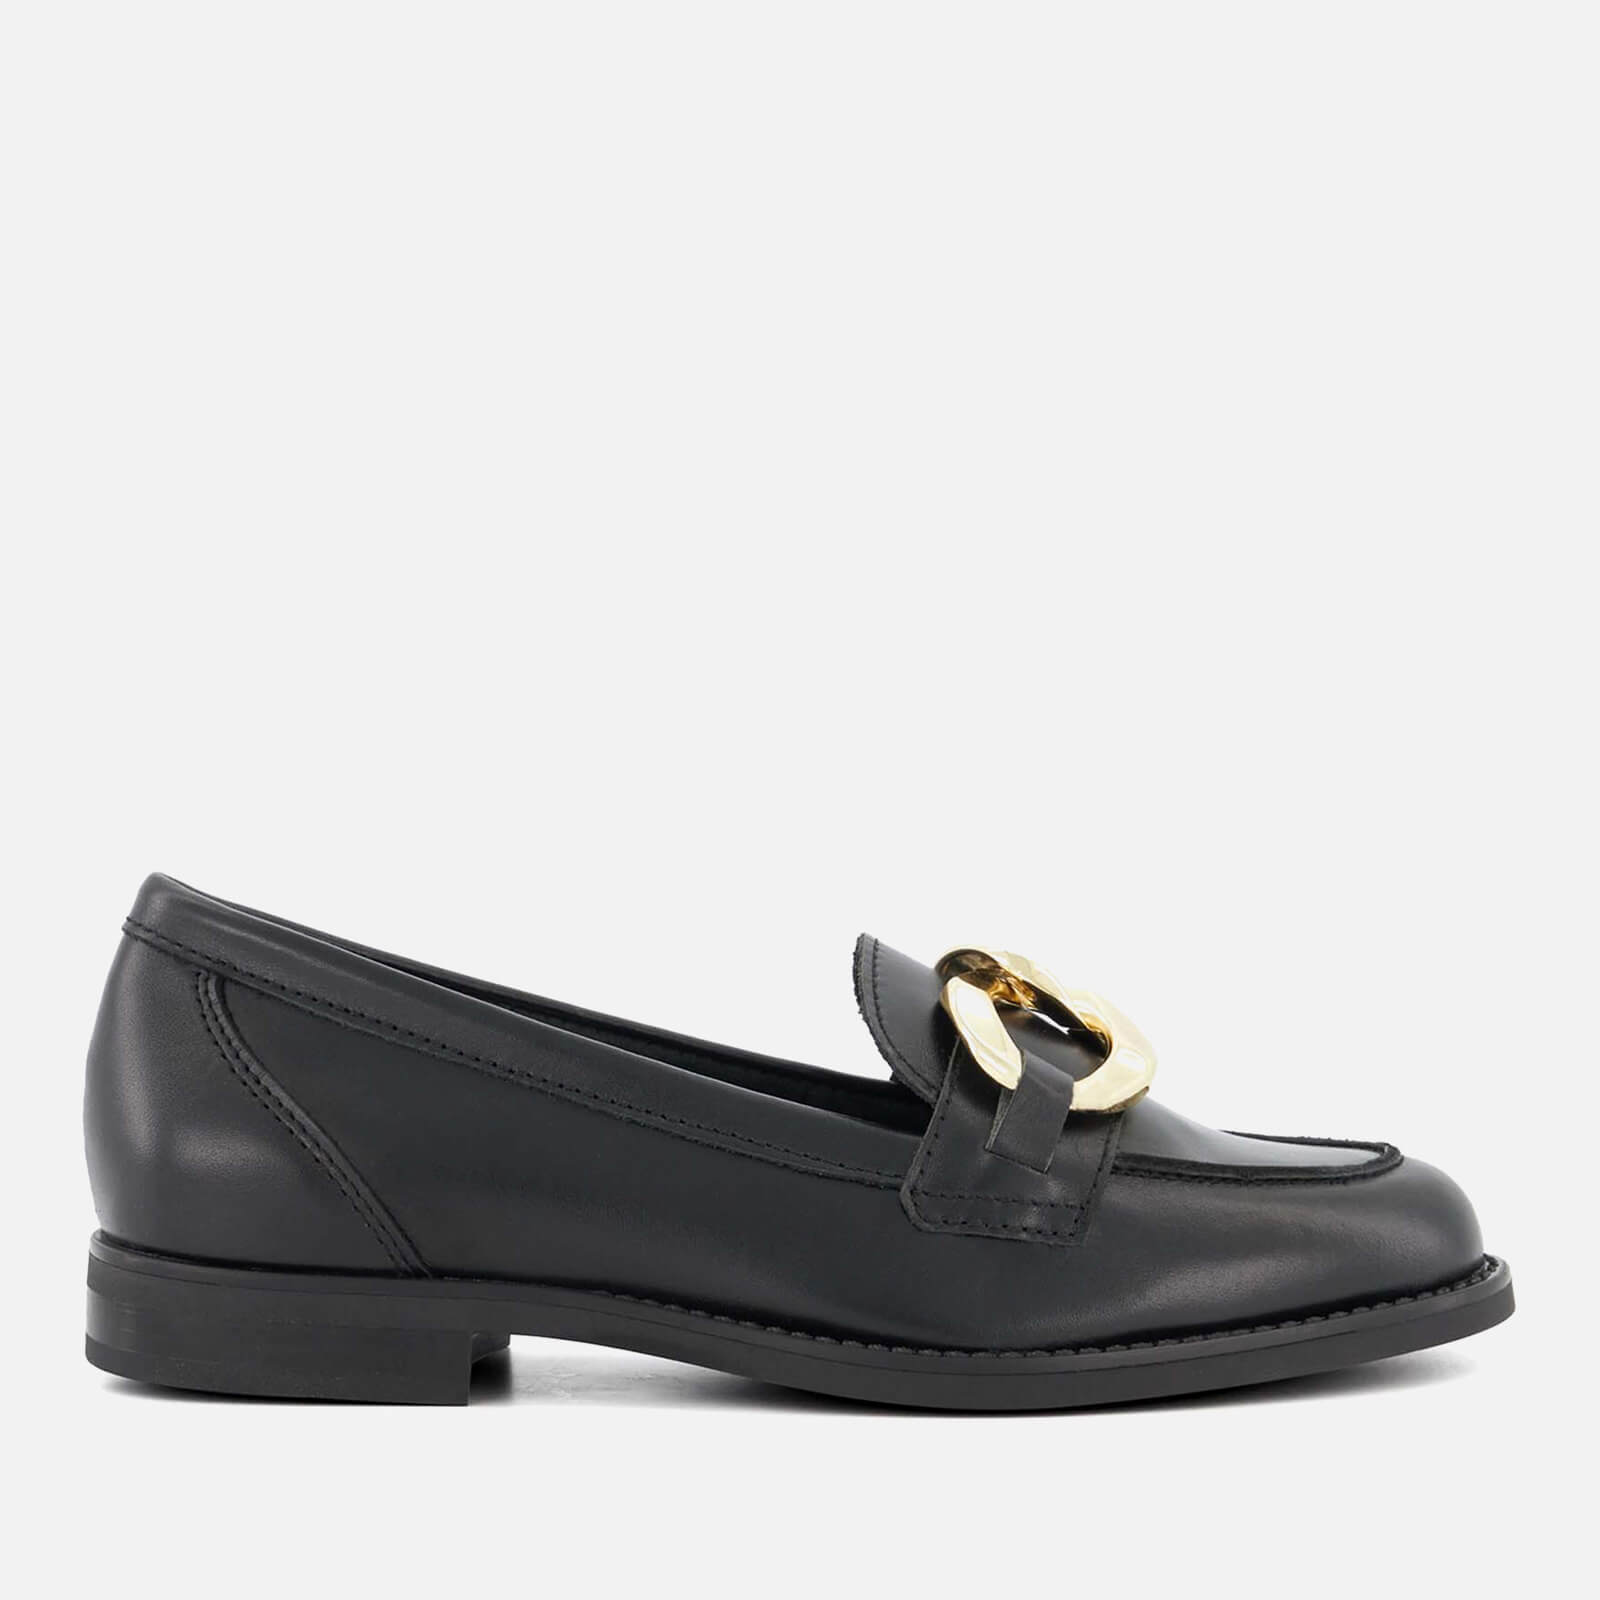 Dune Women’s Goddess Leather Loafers